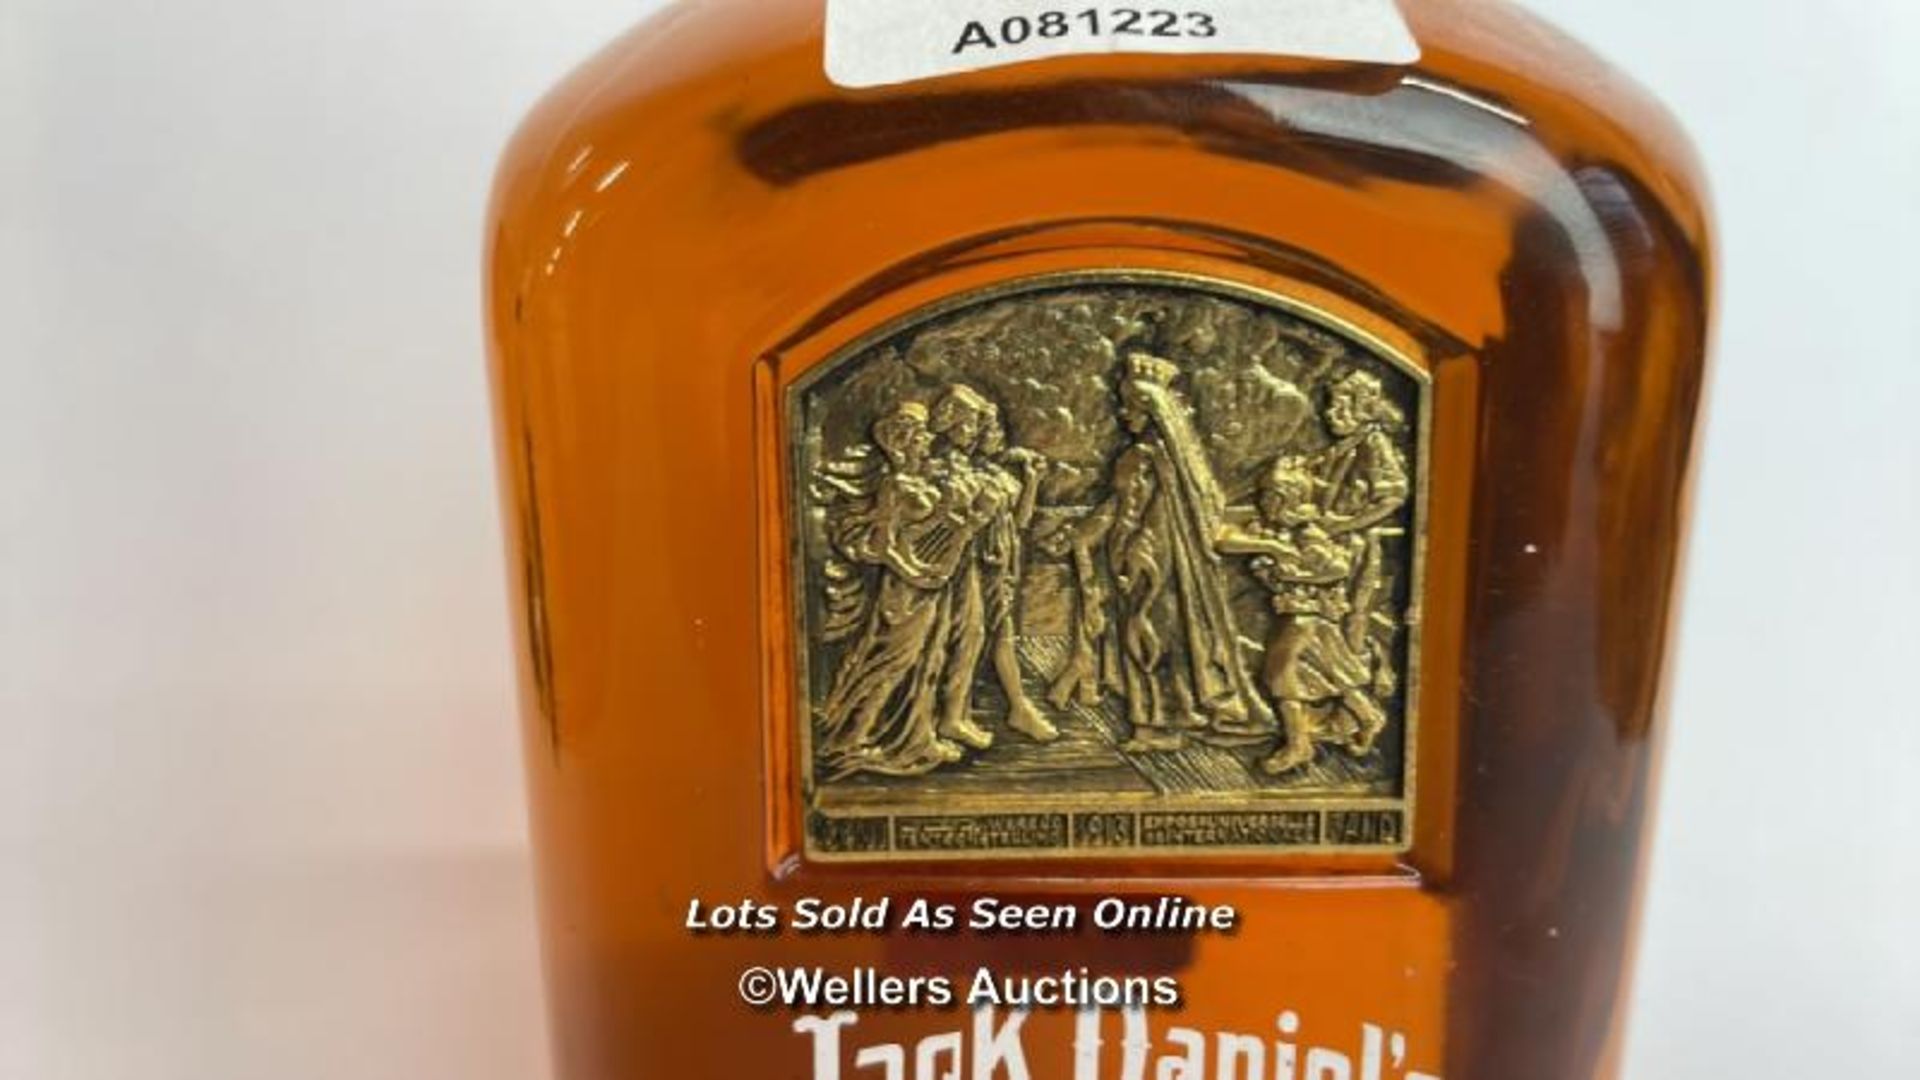 1913 Jack Daniels Tennesse Whiskey Gold Medal, 75cl, 43% vol / Please see images for fill level - Image 3 of 6